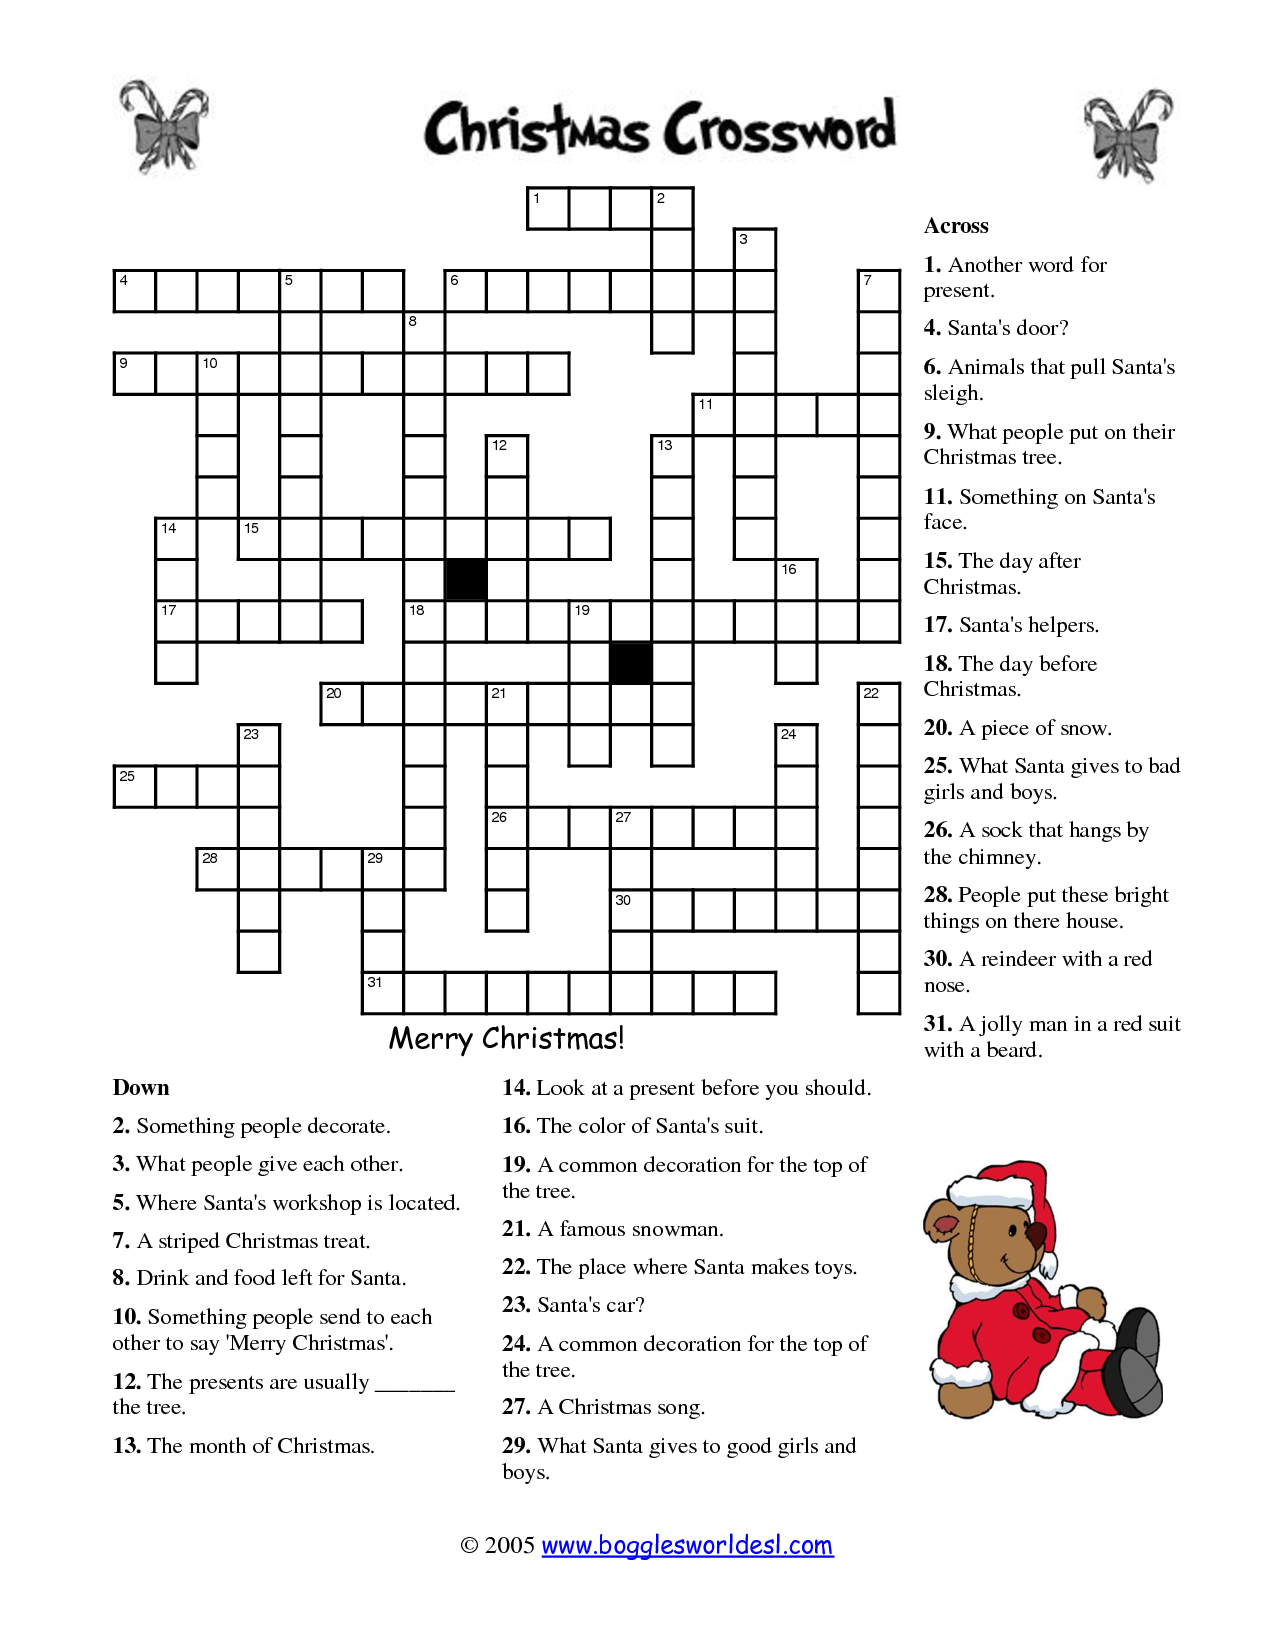 5-best-images-of-printable-christmas-crossword-puzzles-answers-kids-christmas-crossword